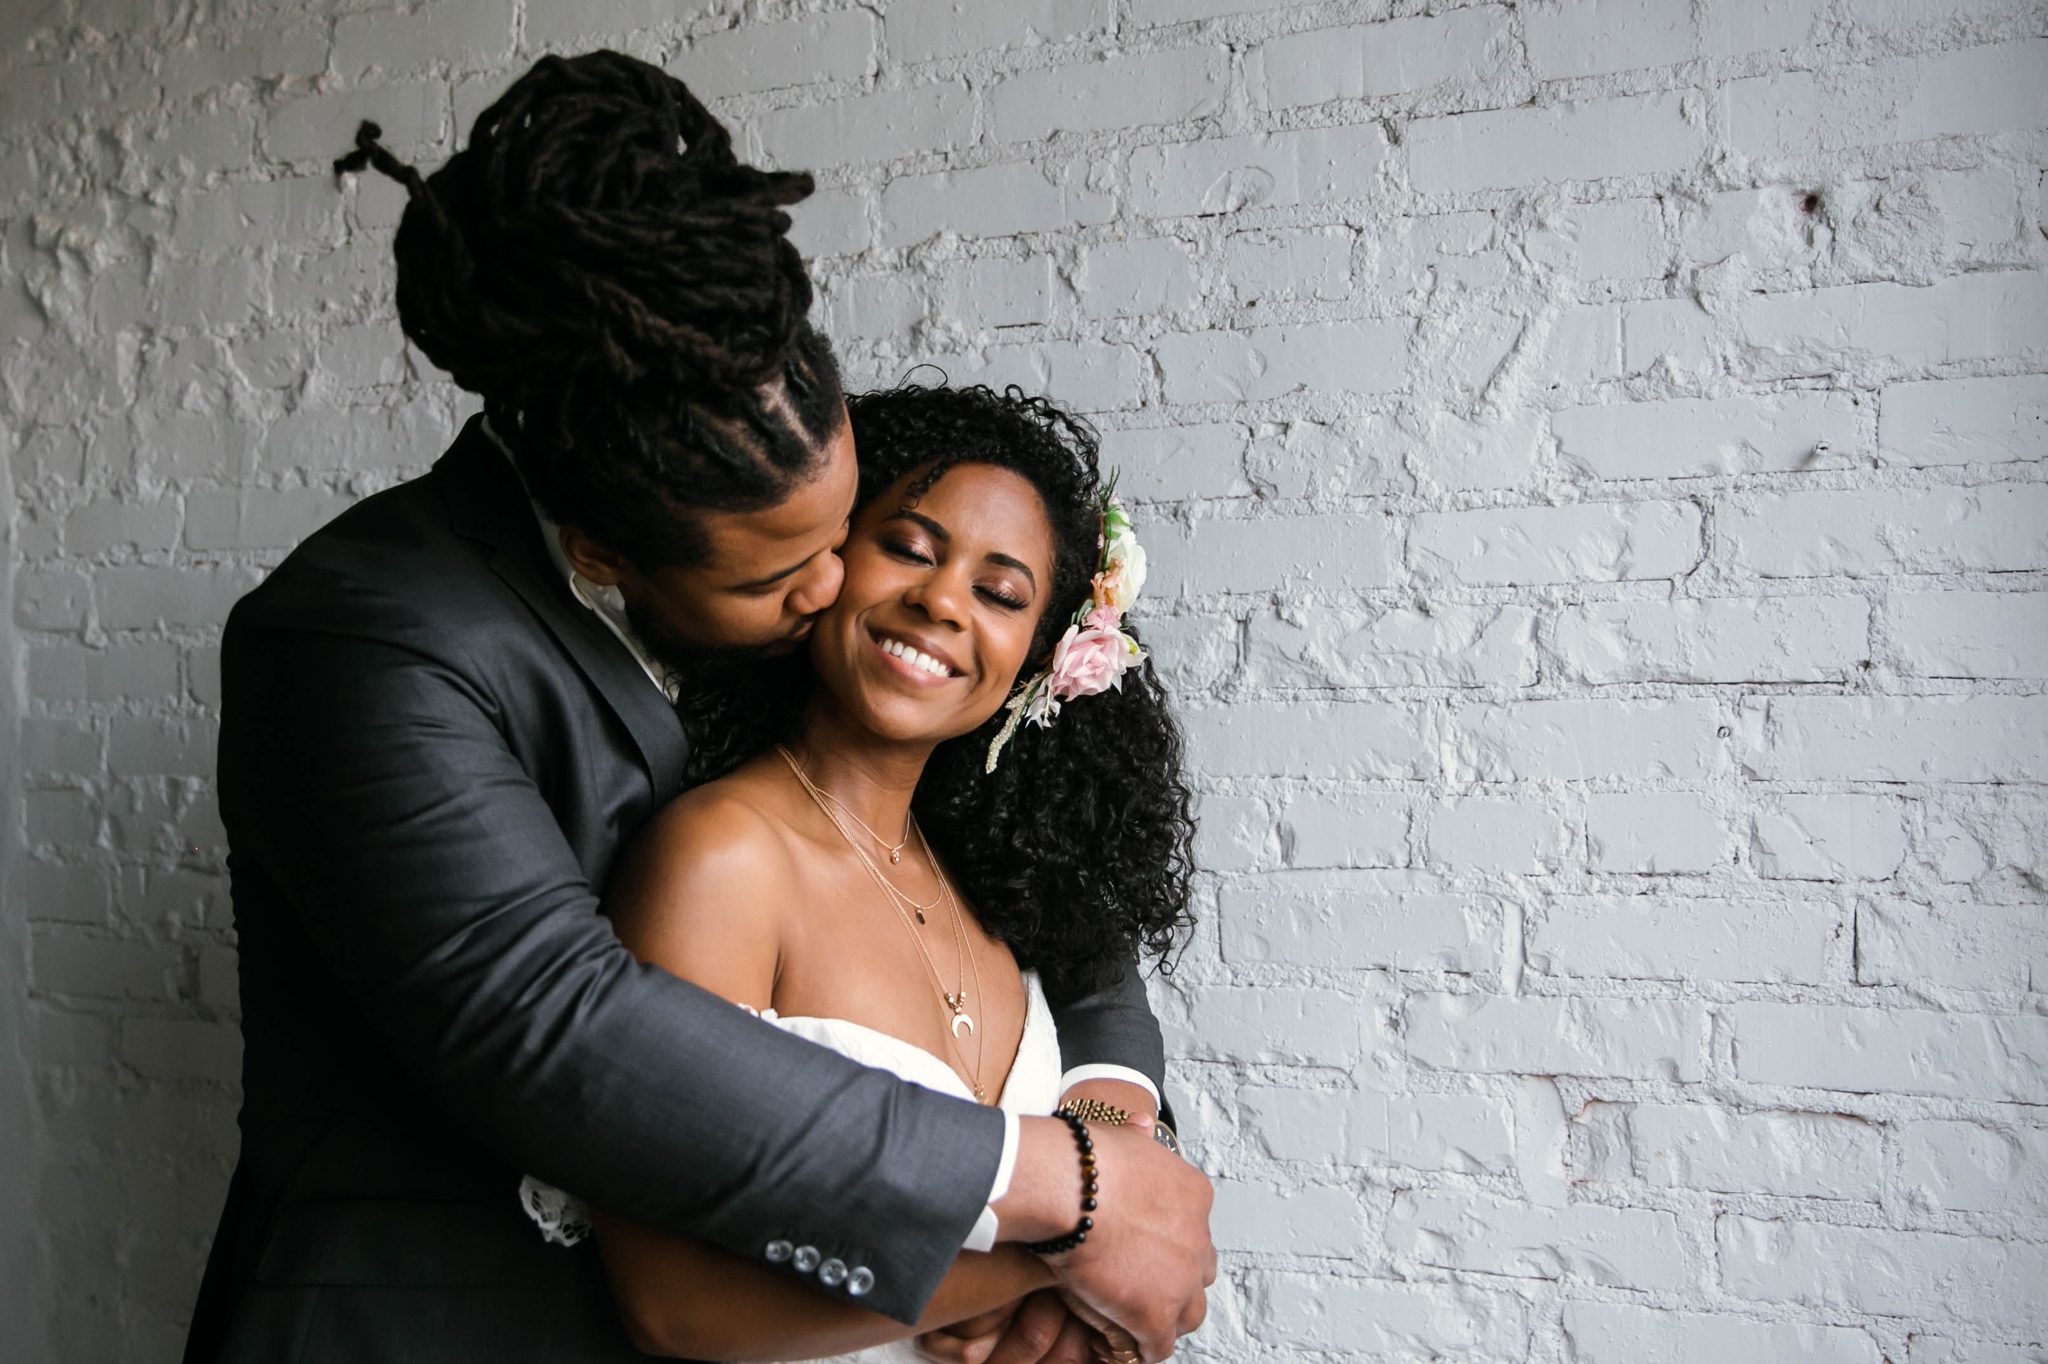 Natural light Indoor Portrait by a window of Bride and Groom - African American boho tropical wedding inspiration by Honolulu, Oahu, Hawaii Photographer - Black Love